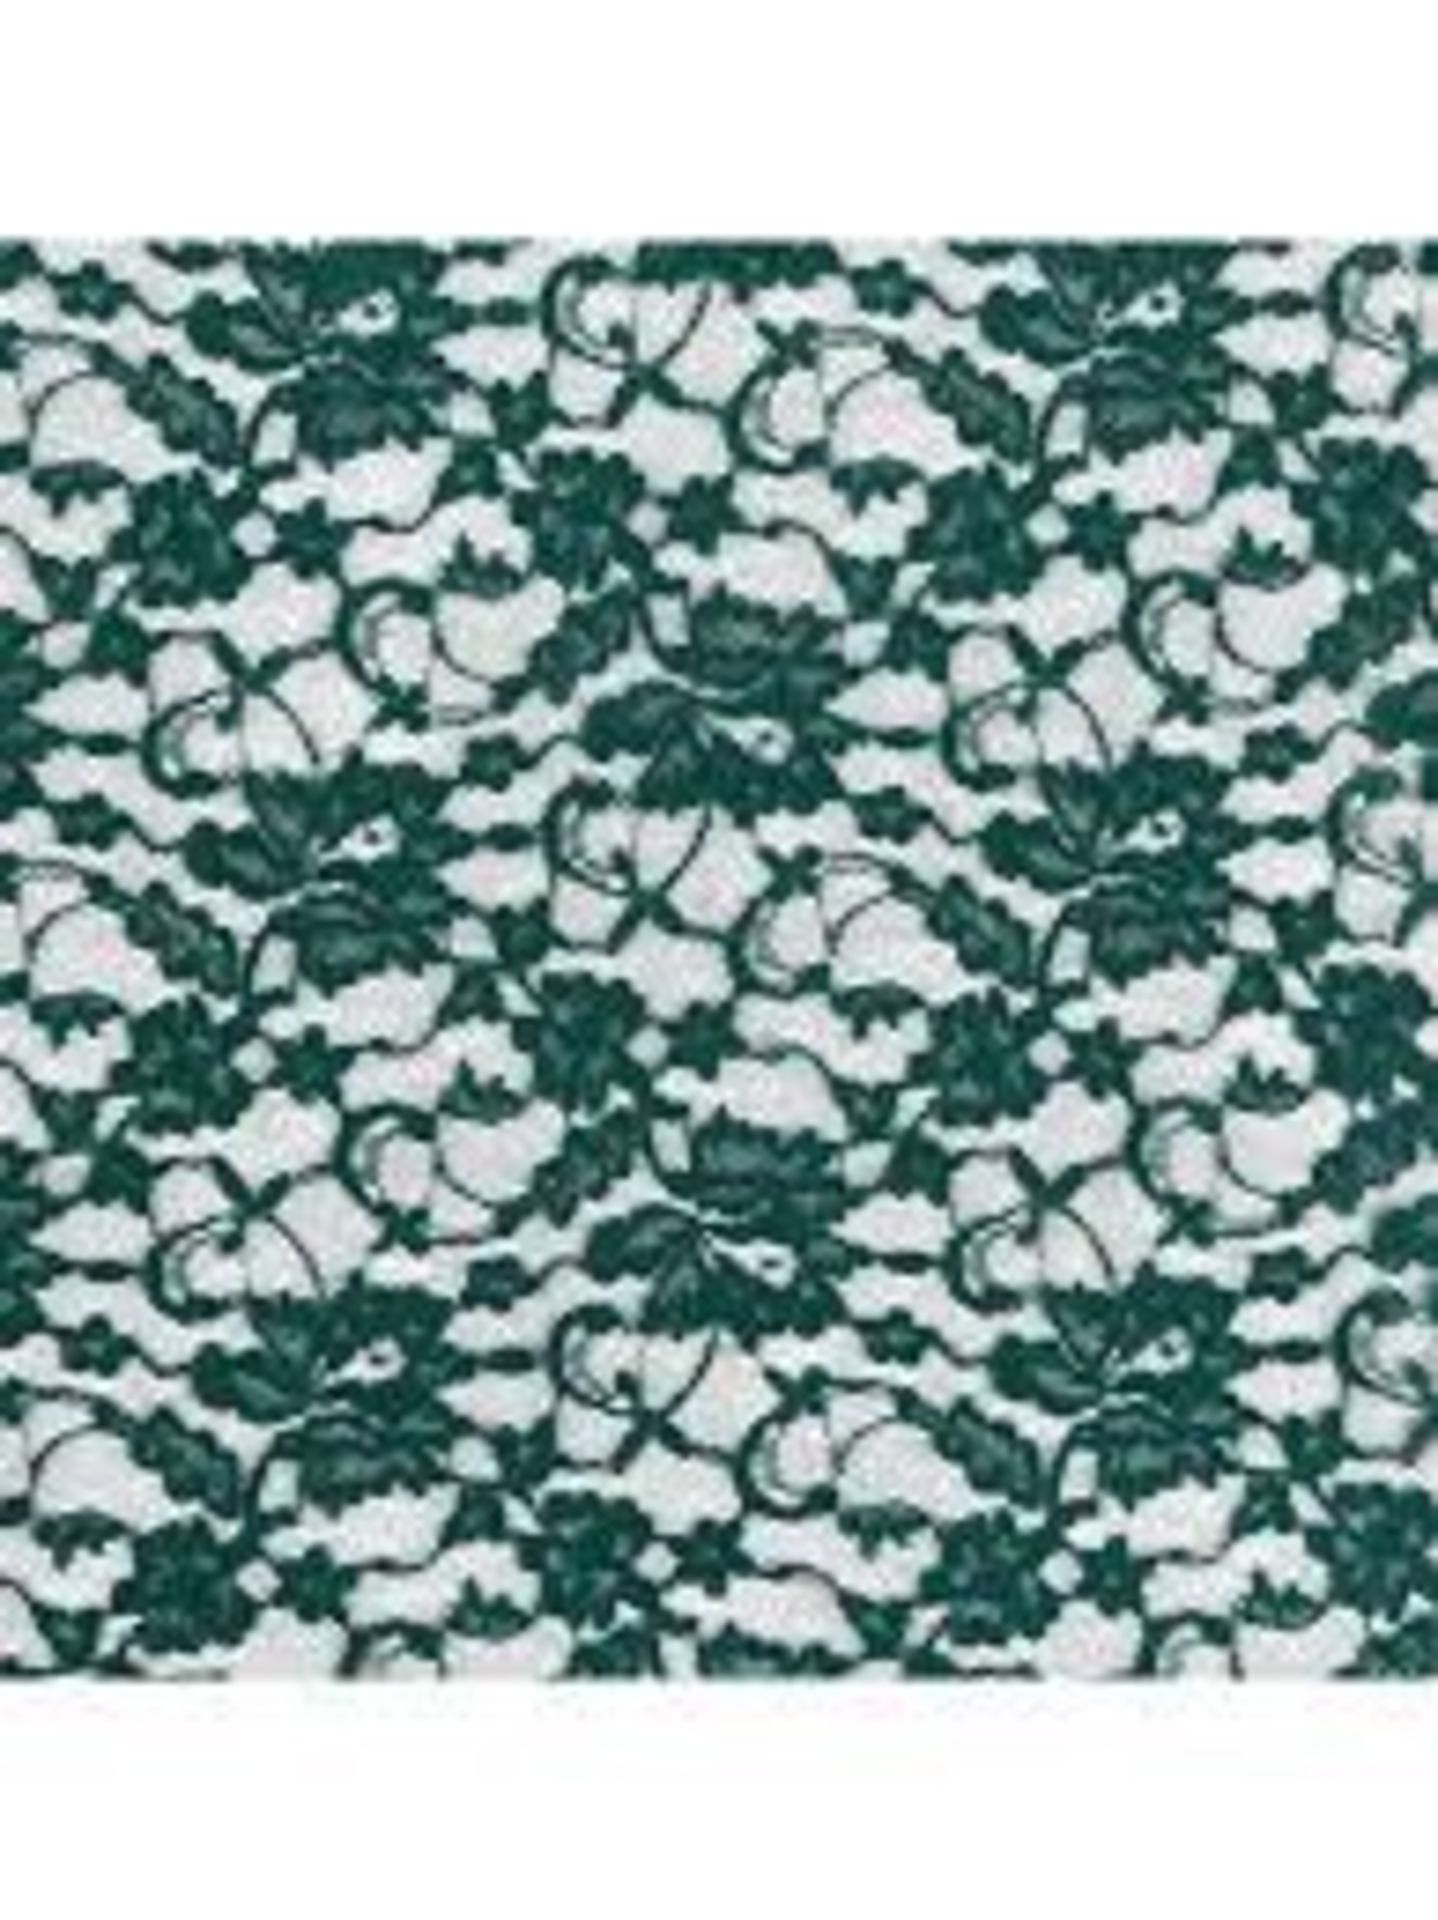 Sourced From John Lewis: Jane McCouver Scolloped Lace 10mtr Roll of Fabric Upholstery Material